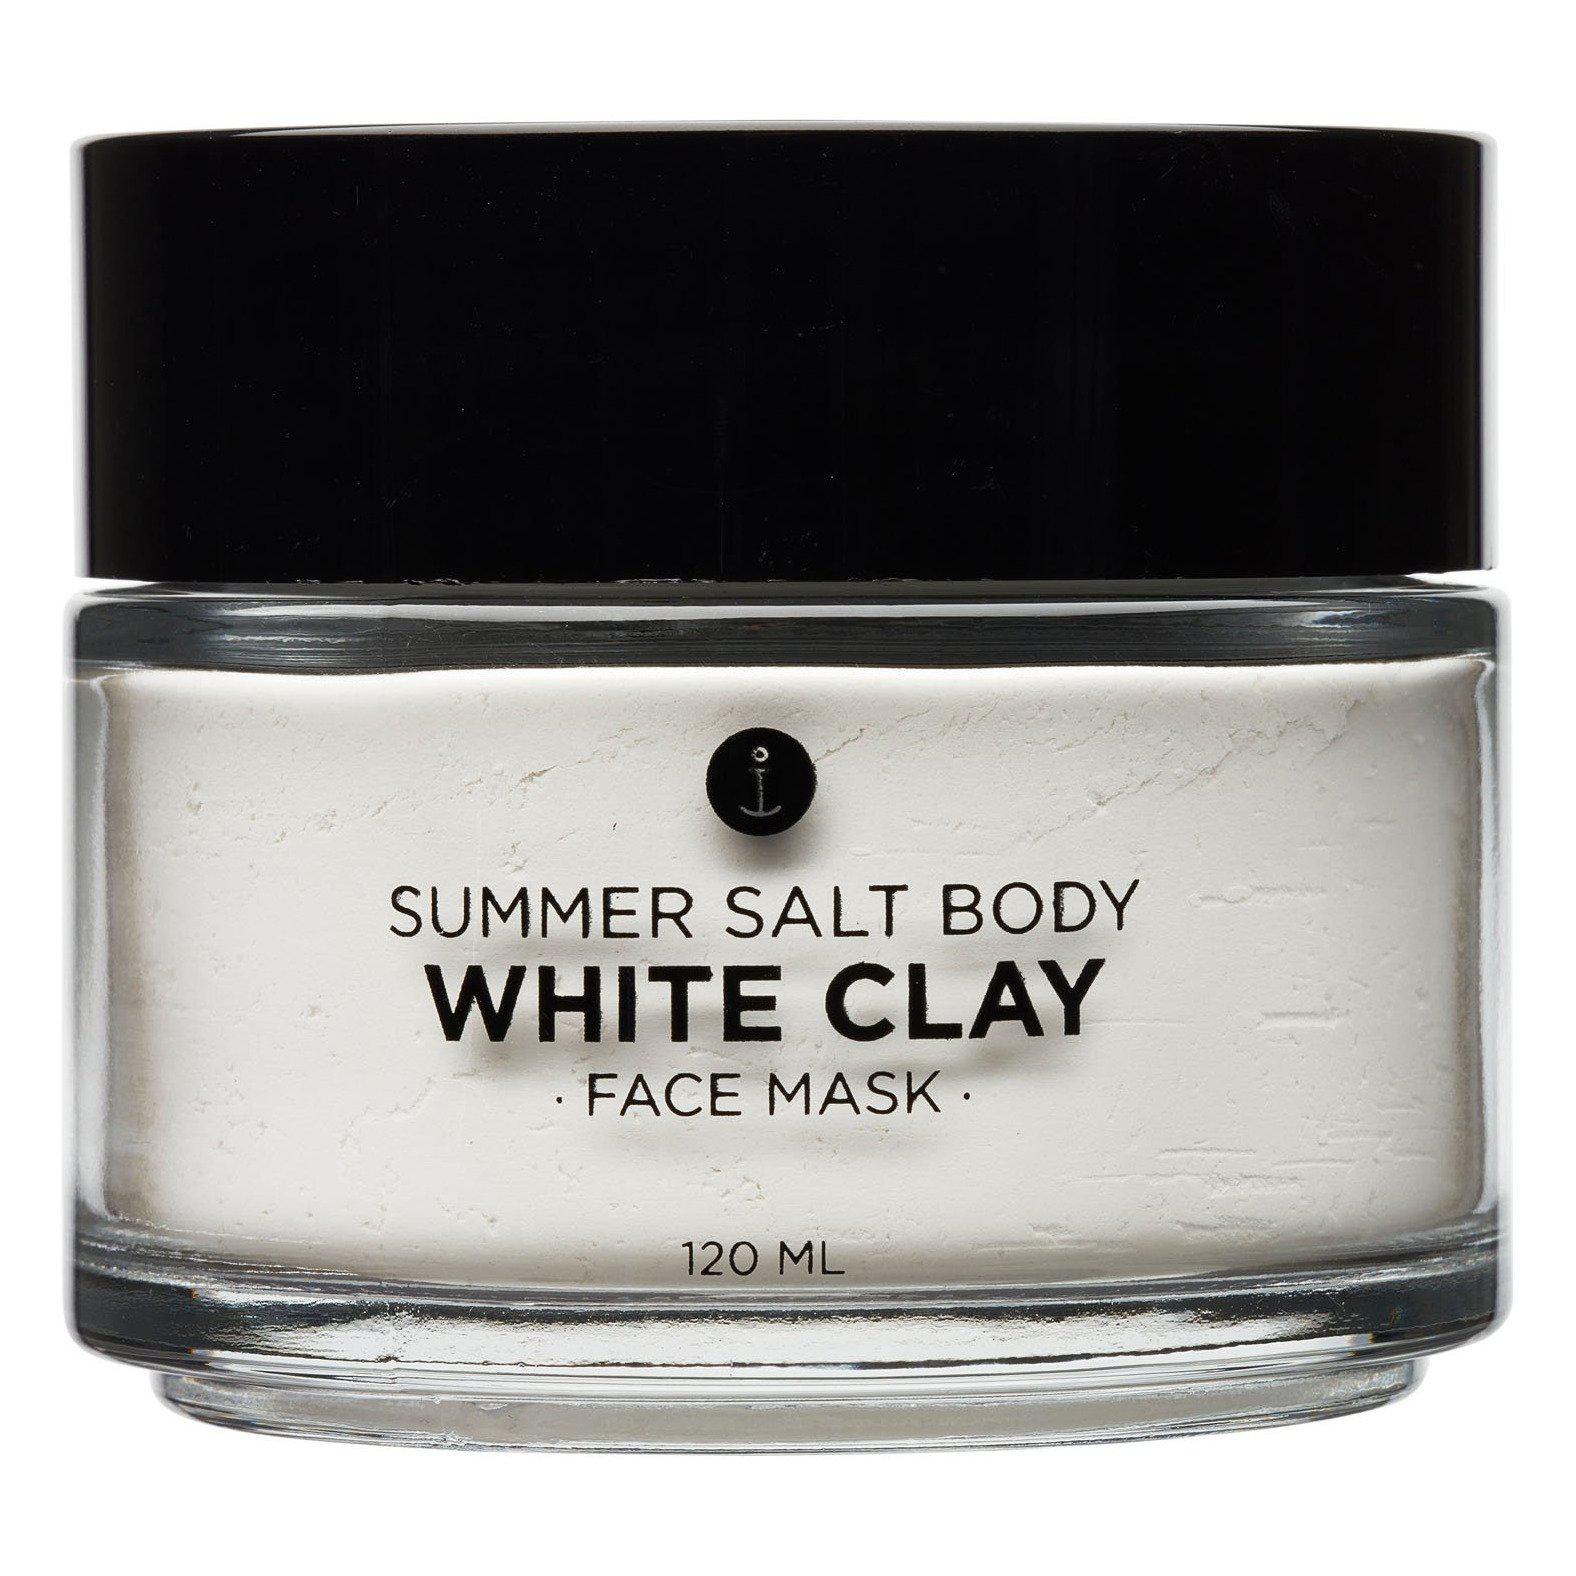 White Clay Mask - 120ml-Beauty & Well-Being-Summer Salt Body-The Bay Room